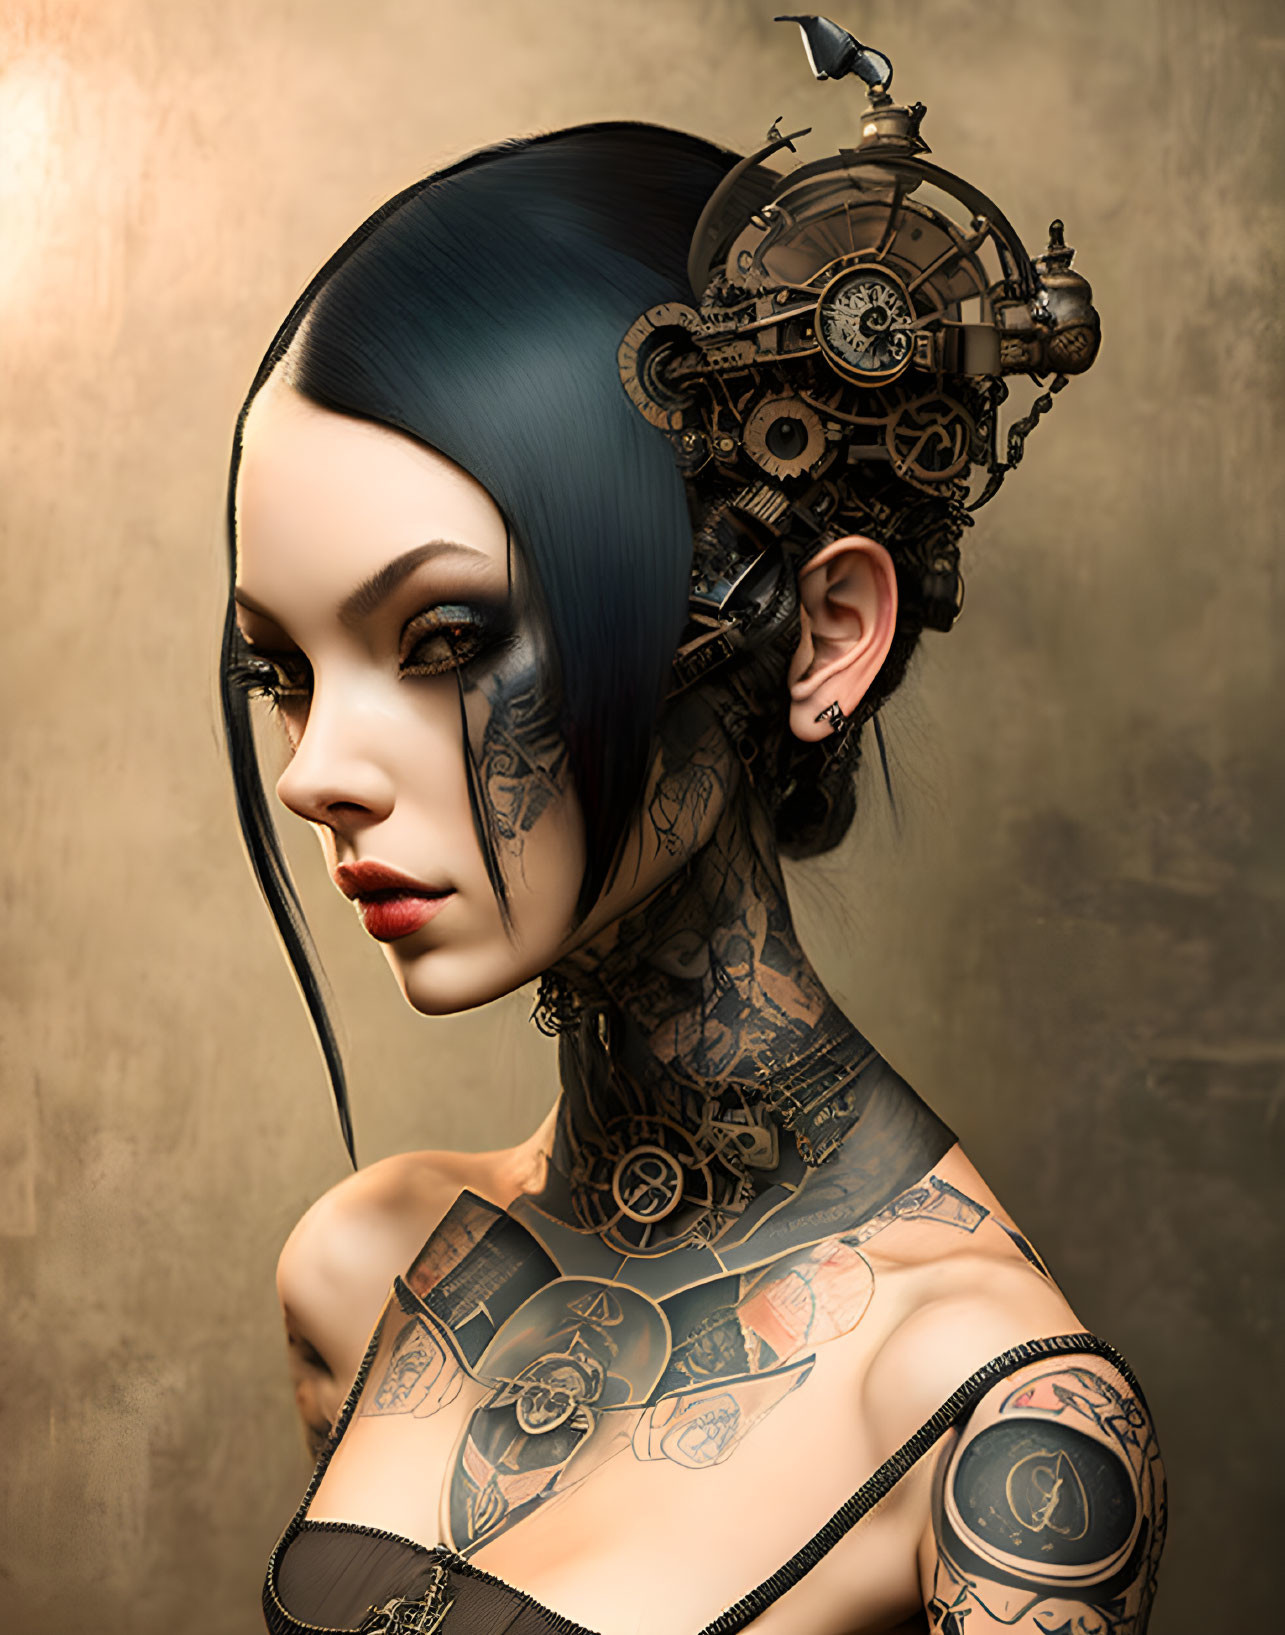 Steampunk-inspired woman portrait with mechanical elements and tattoos on golden backdrop